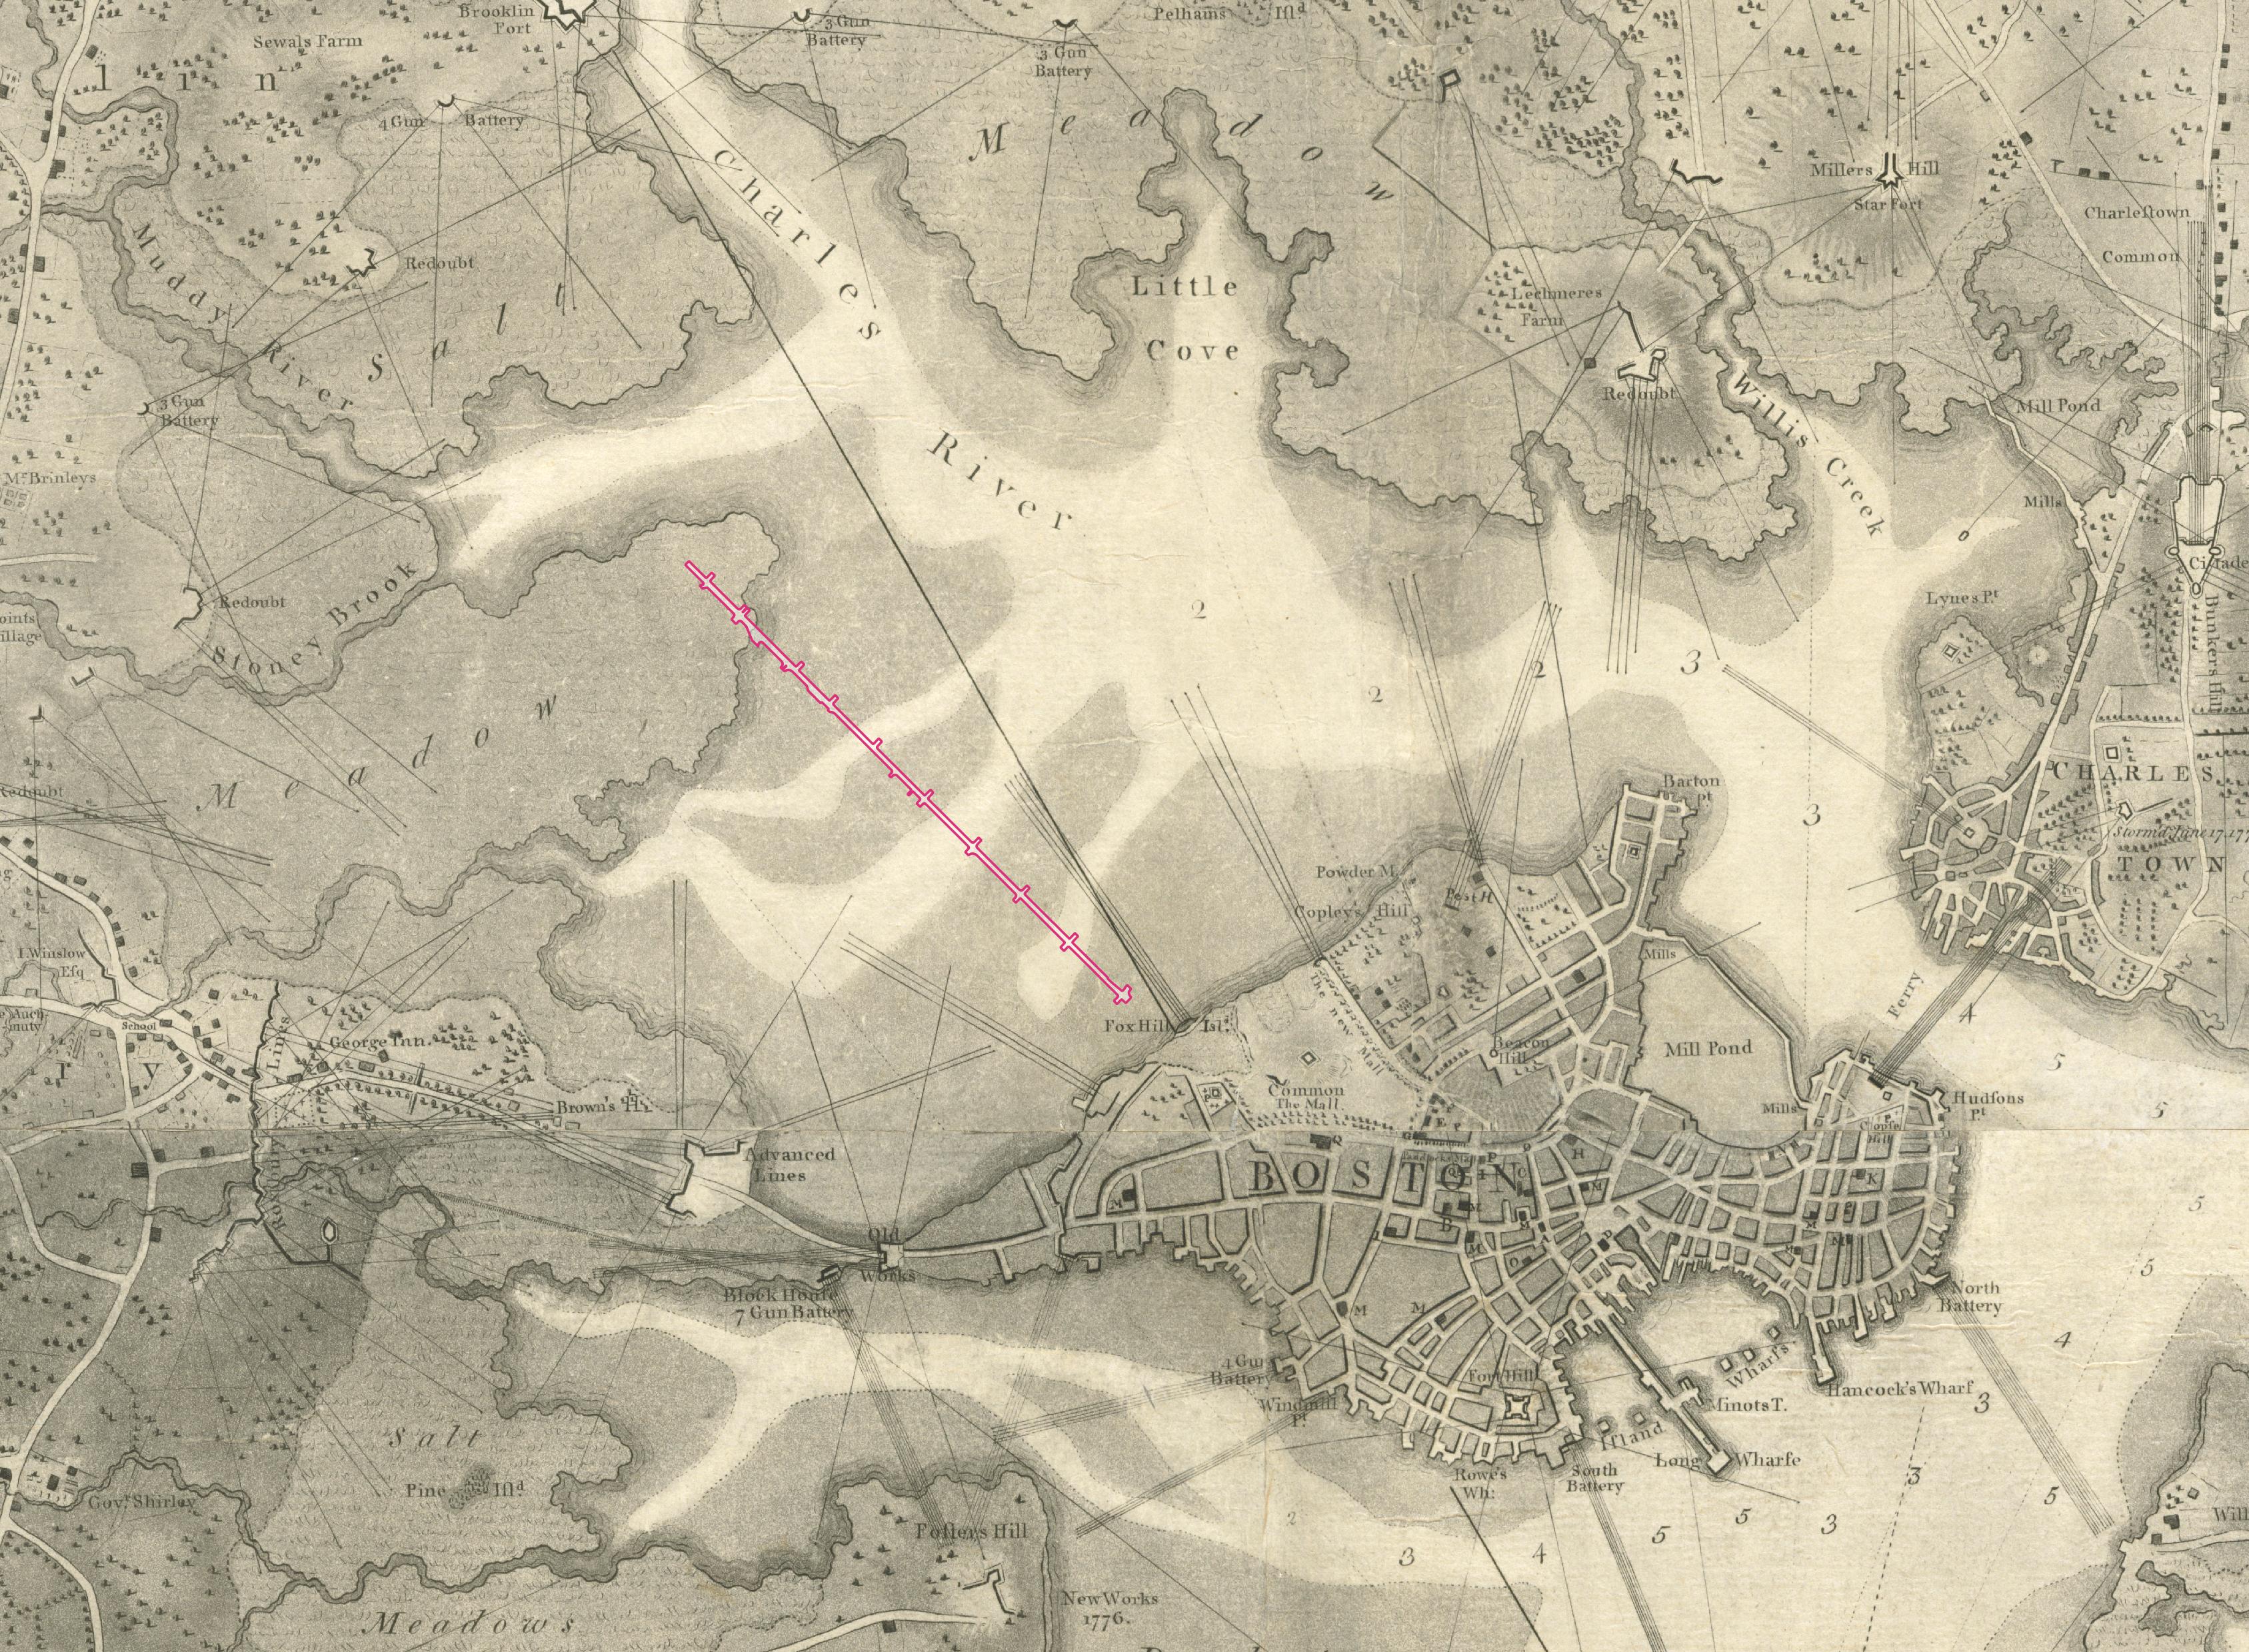 Boylston Street superimposed atop an excerpt from the 1777 [Pelham map of Revolutionary War-era Boston], before the Back Bay neighborhood was filled